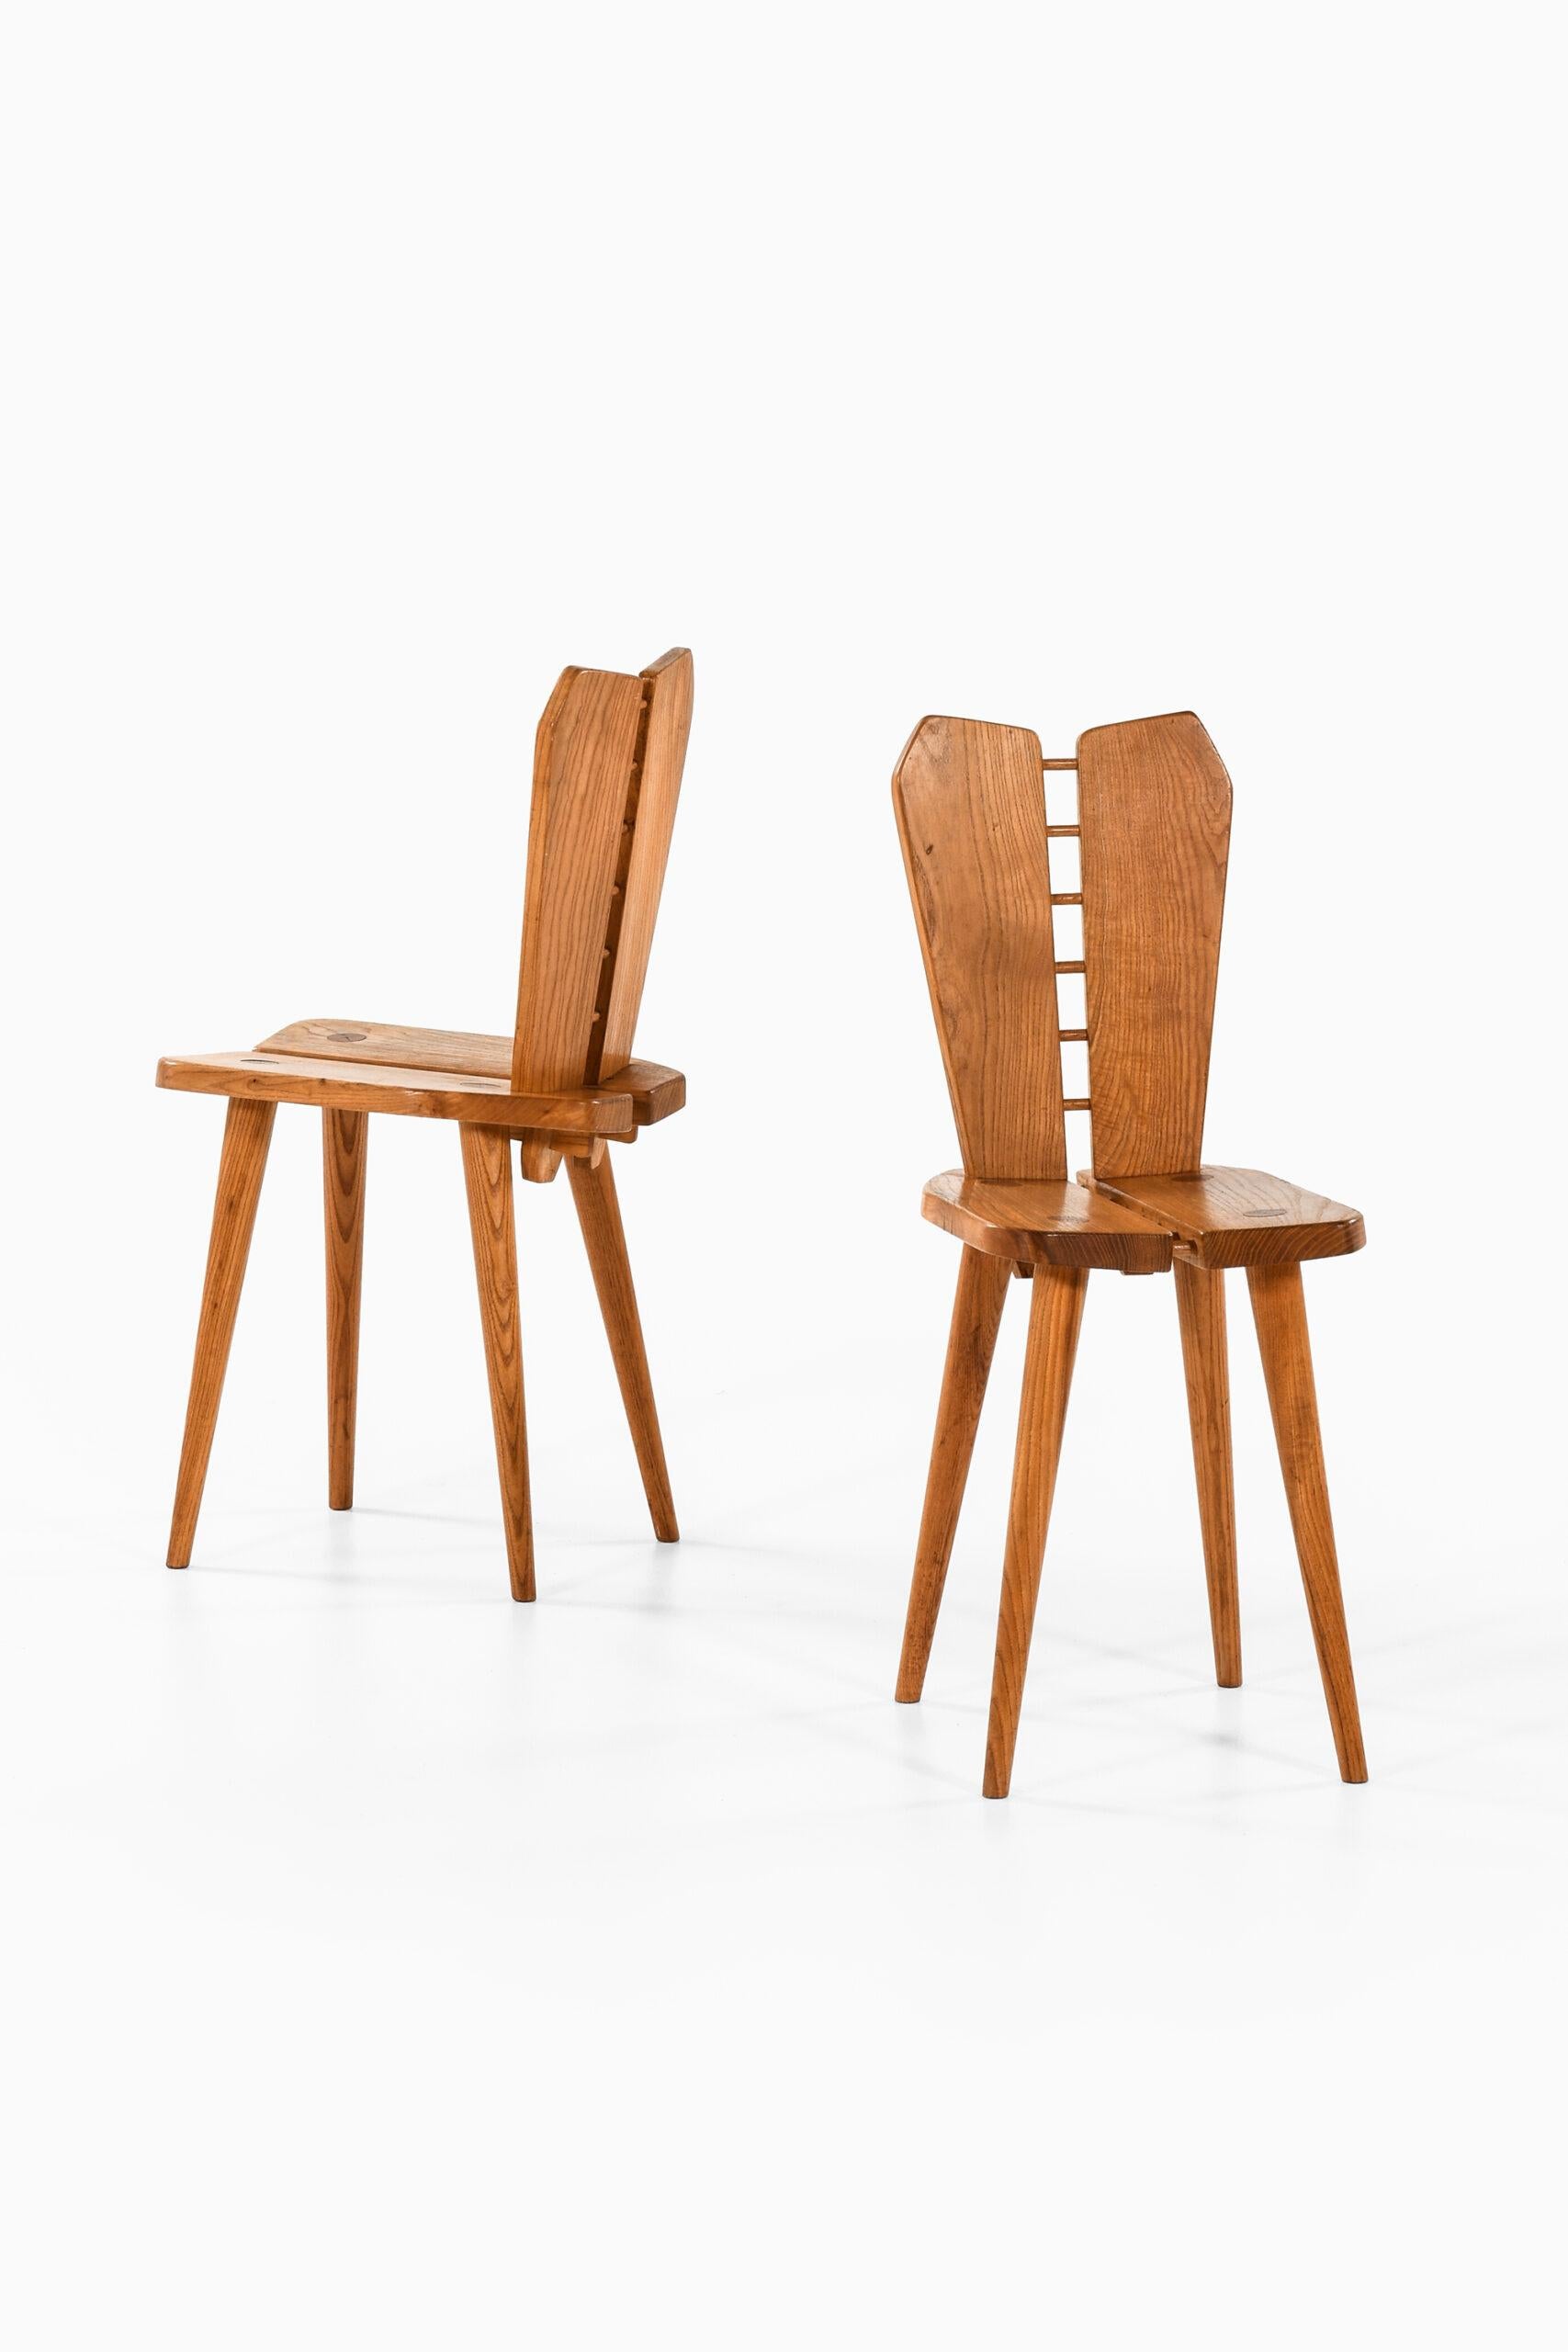 Mid-20th Century Chairs Produced in Scandinavia For Sale